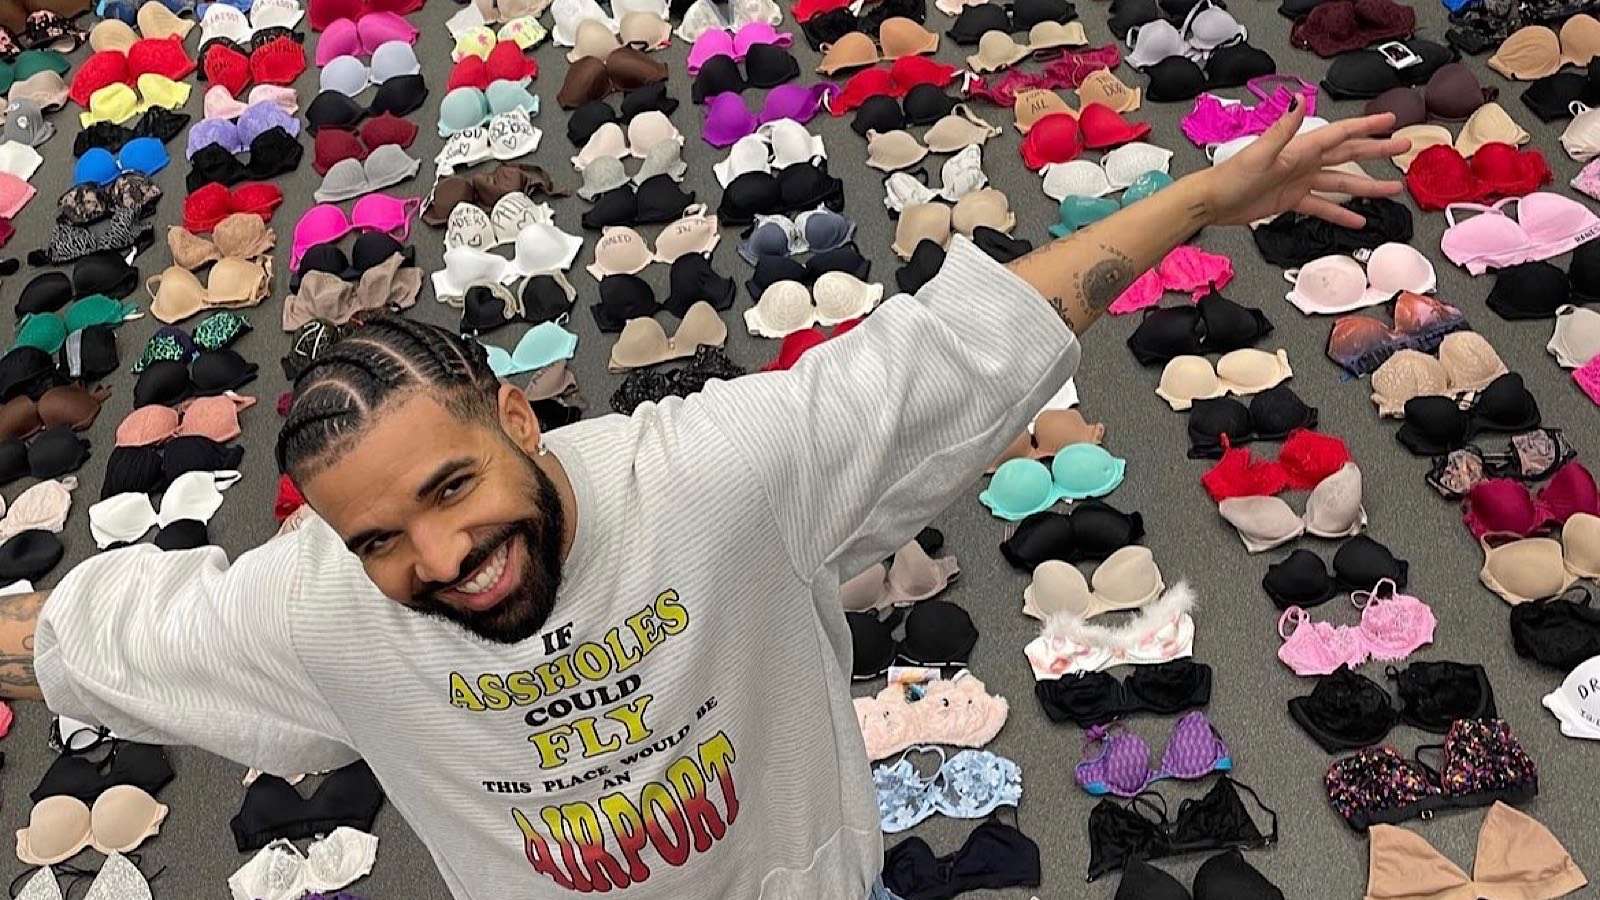 Woman Who Threw Her 36G Bra At Drake Gets Surprise DM